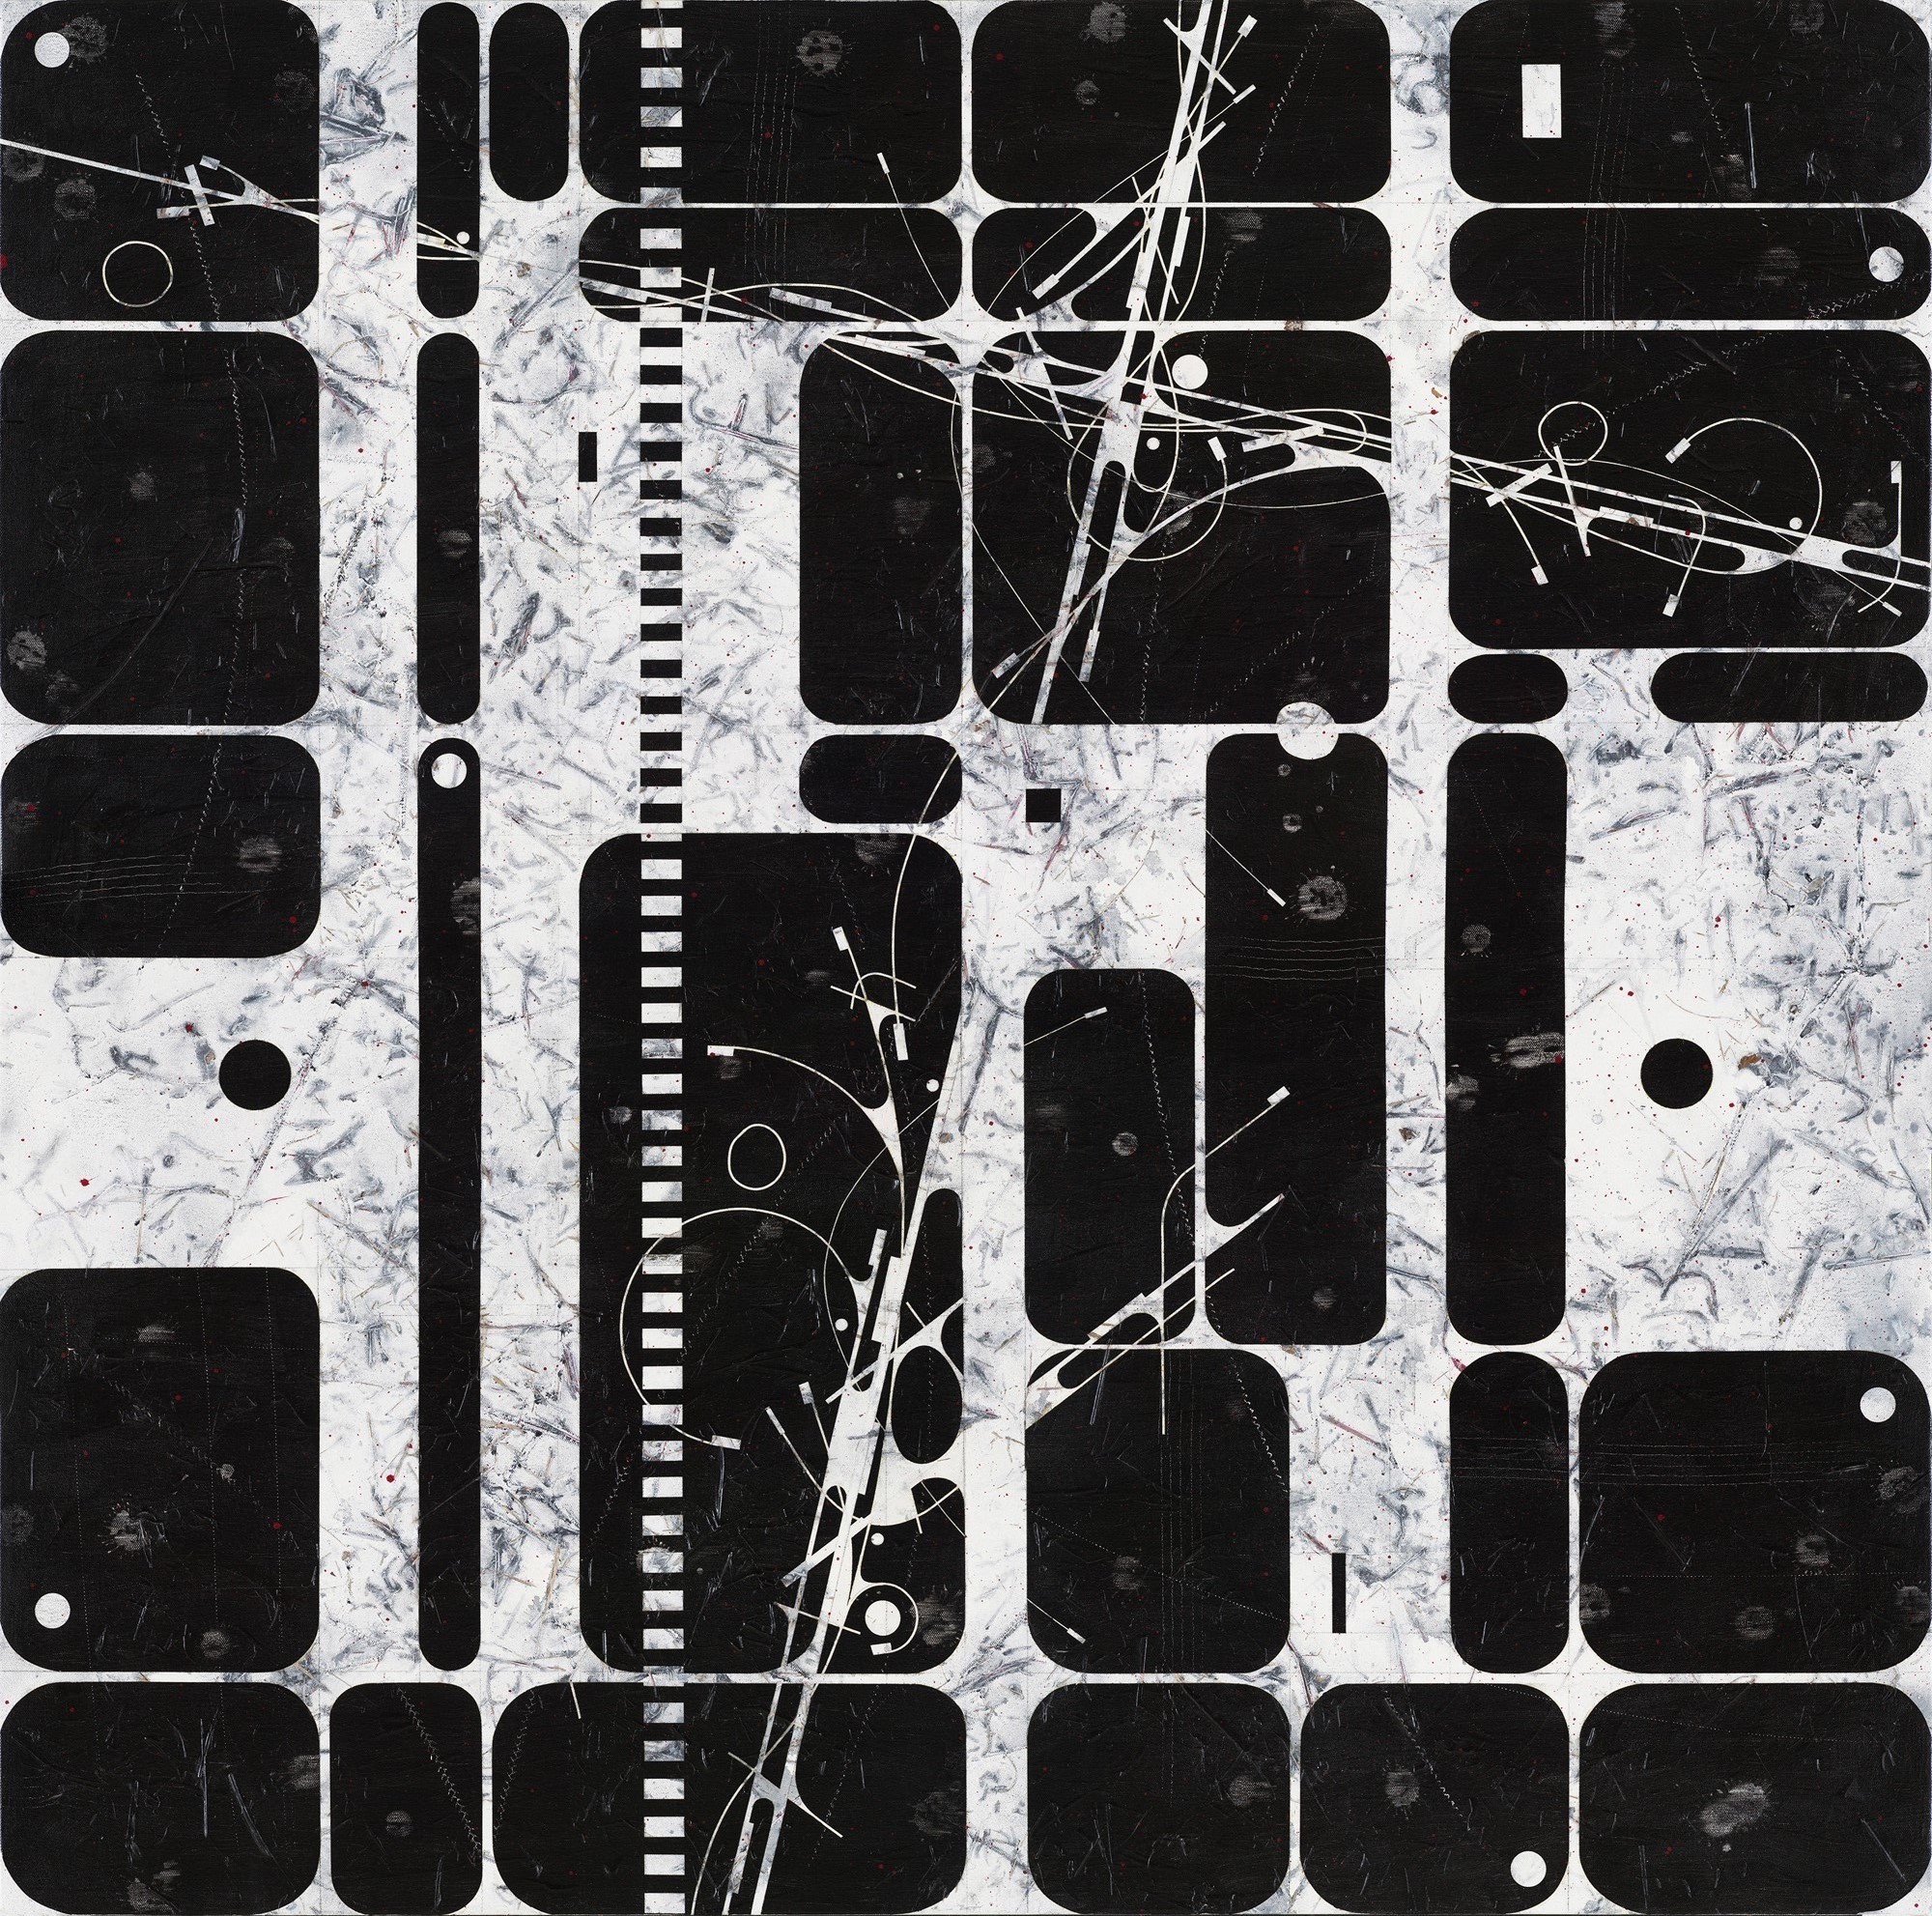 A large format black and white painting. It combines a gray textured background with bold black rectangles on top. Layered on diagonally from bottom to top are lyrical, almost vine-like lines 